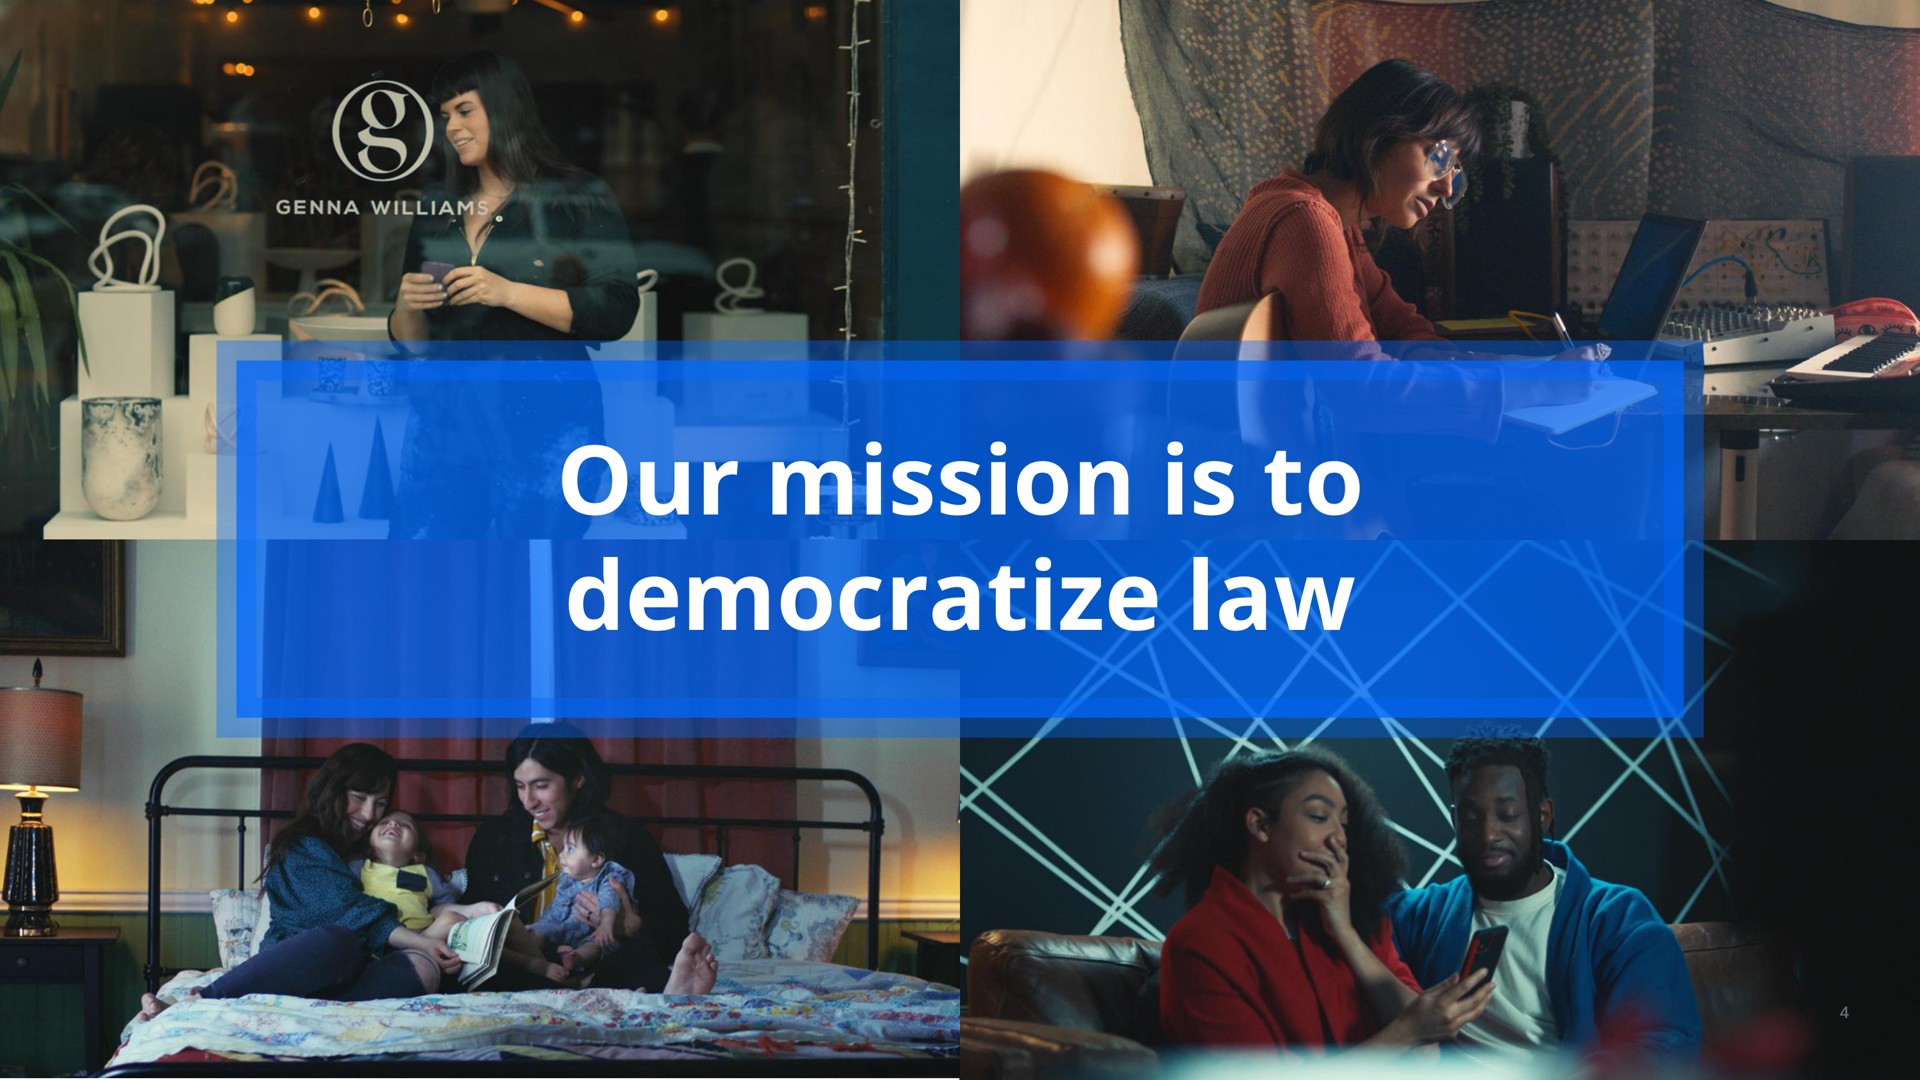 our mission is to democratize law a his shag | LegalZoom.com